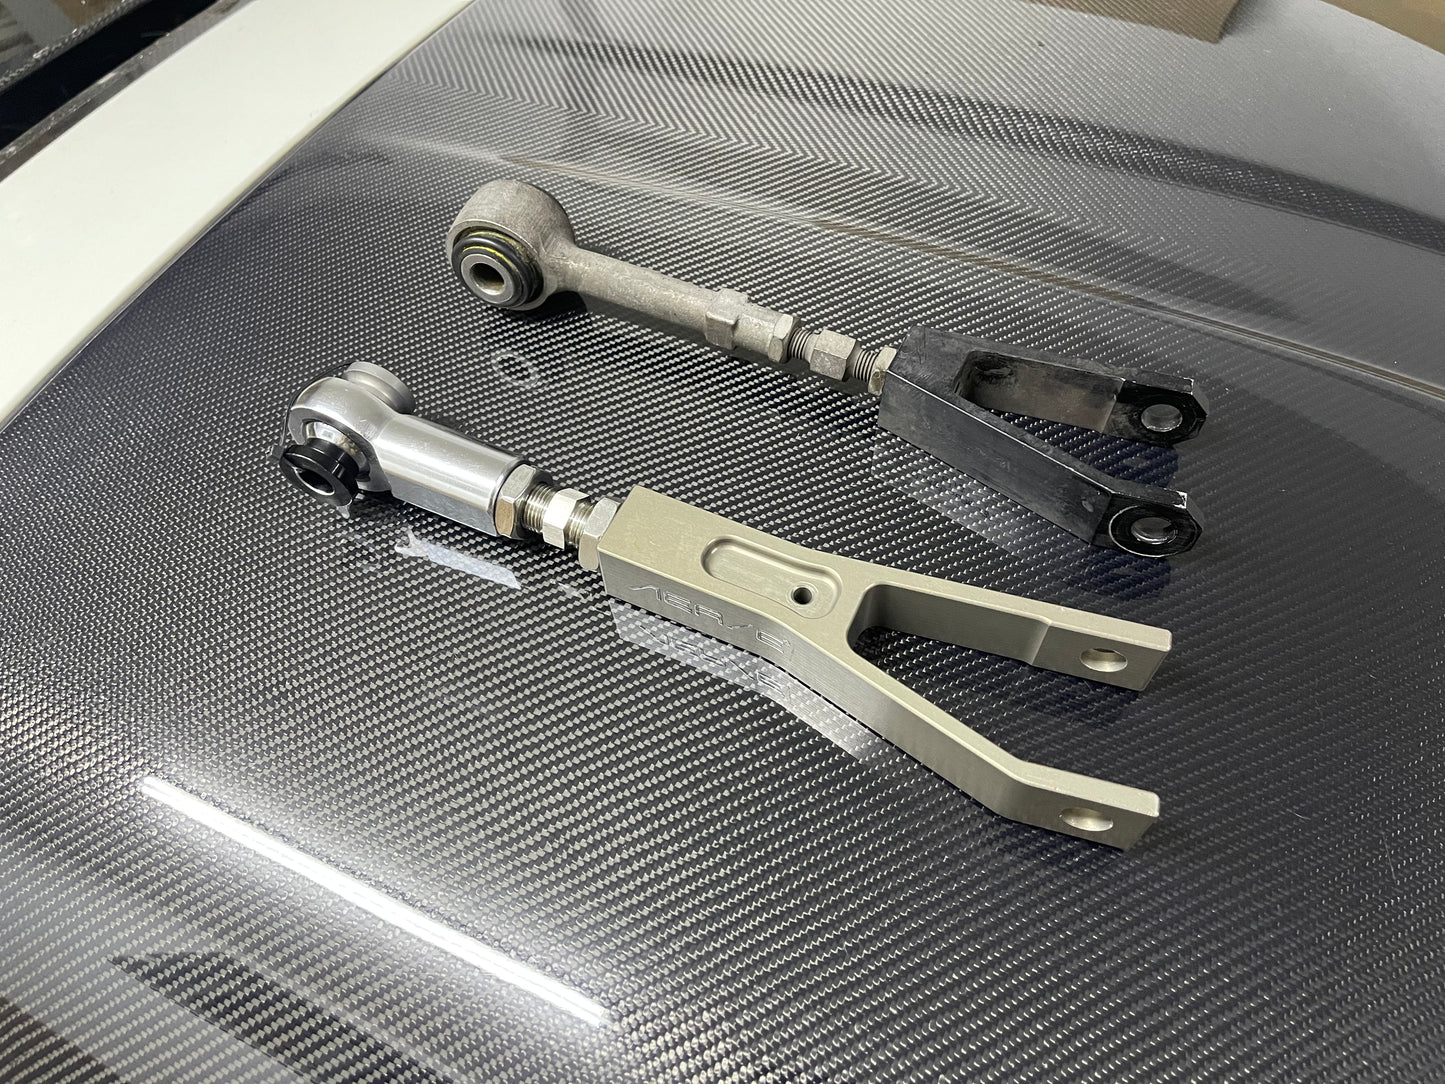 Lotus Exige V6 toe link and outer clevis upgrade kit